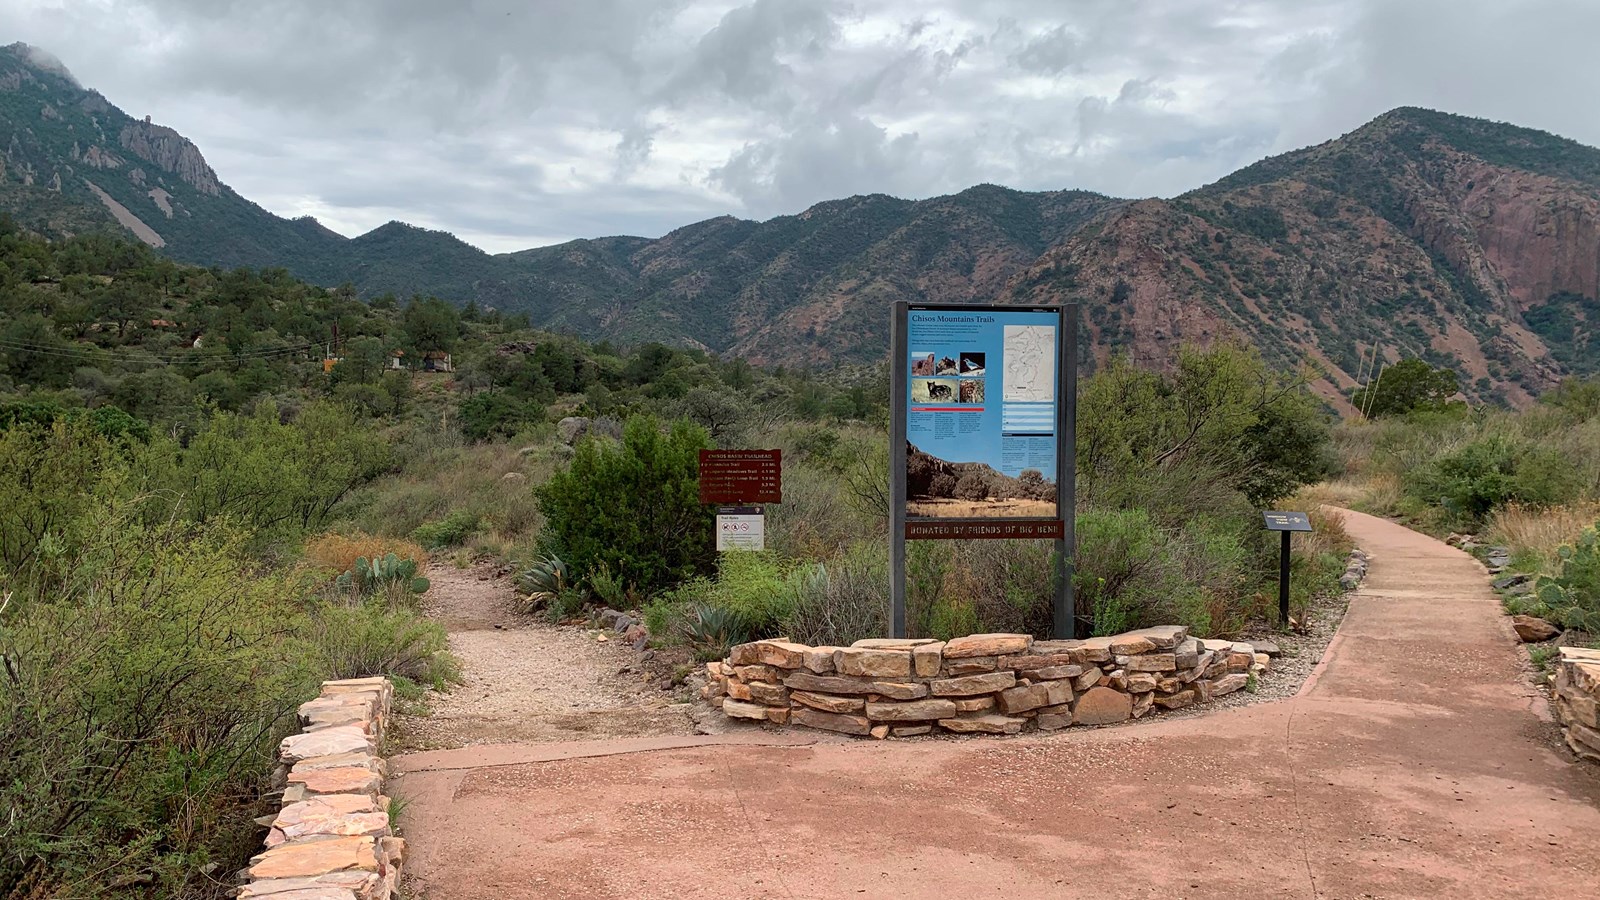 a sidewalk with stonework walls leads toward a metal trailhead sign with mountains in the background